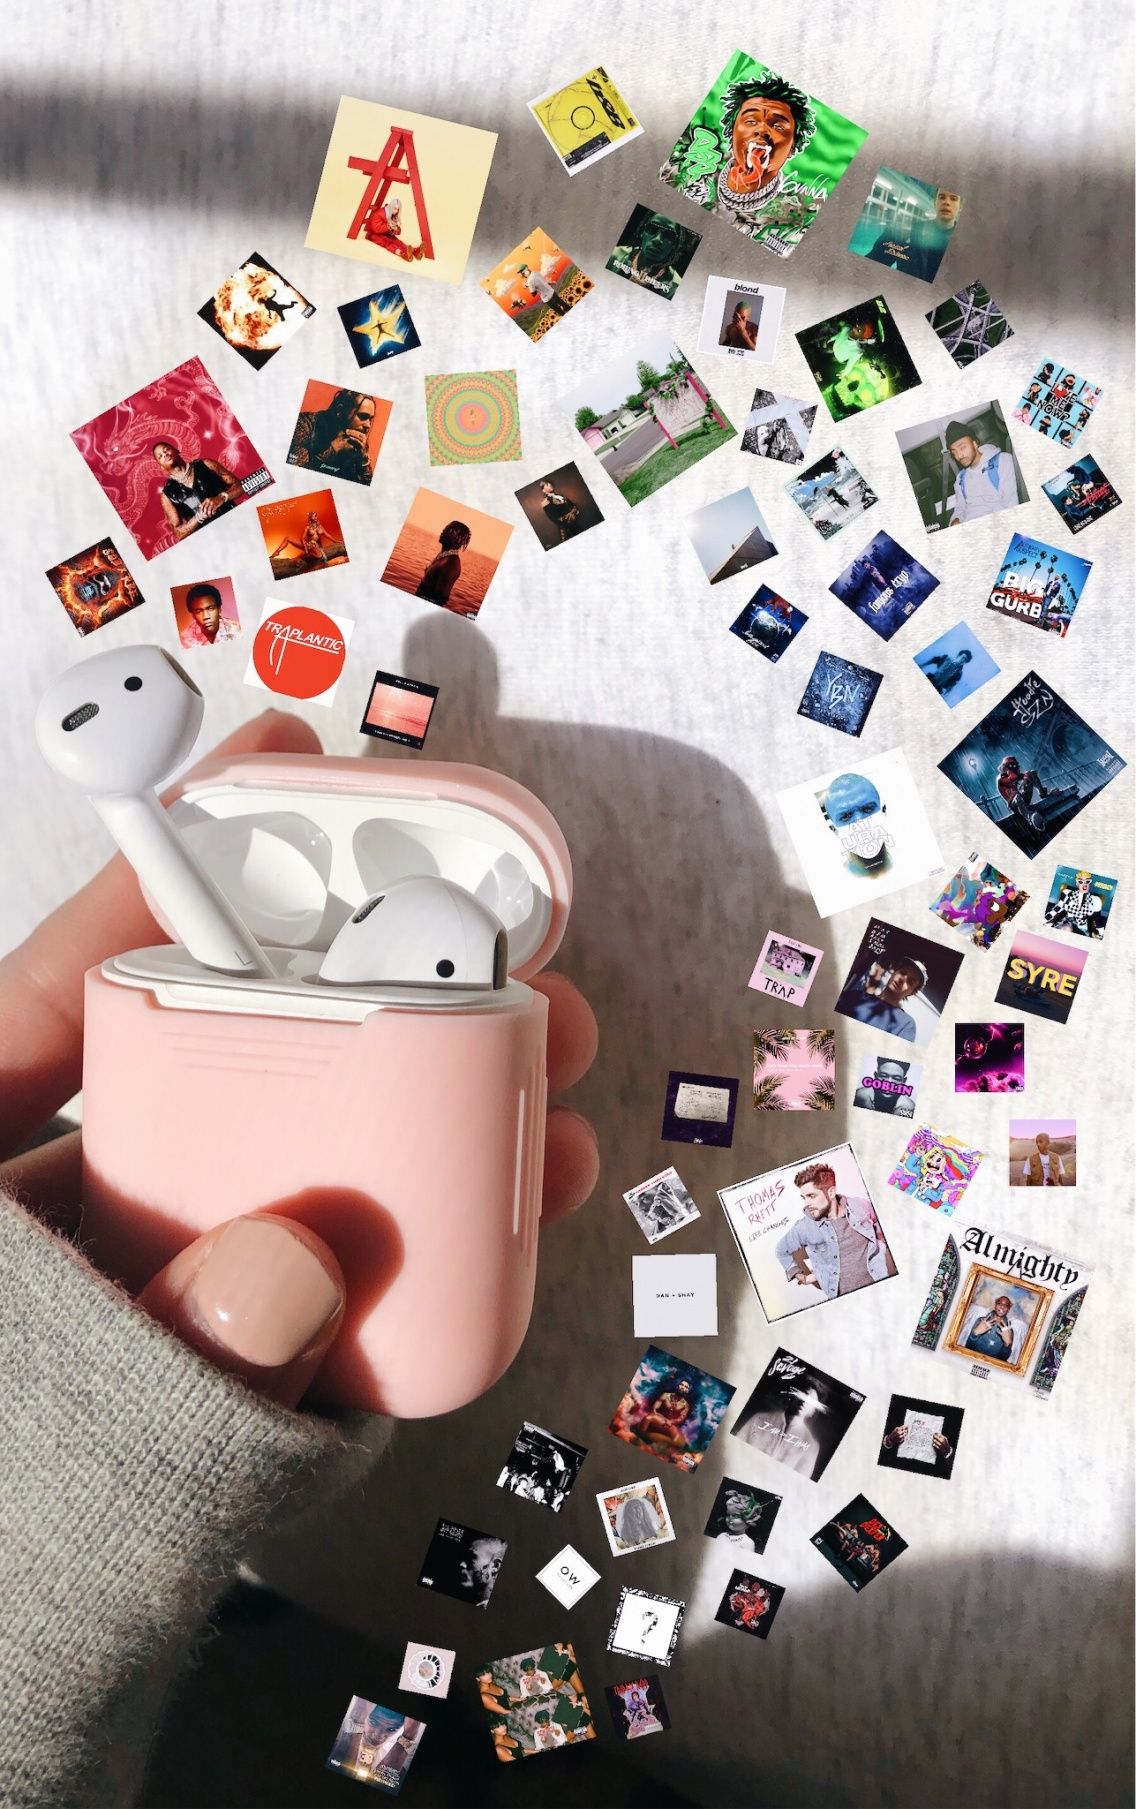 Airpod aesthetic ideas. airpod case, apple accessories, iphone accessories